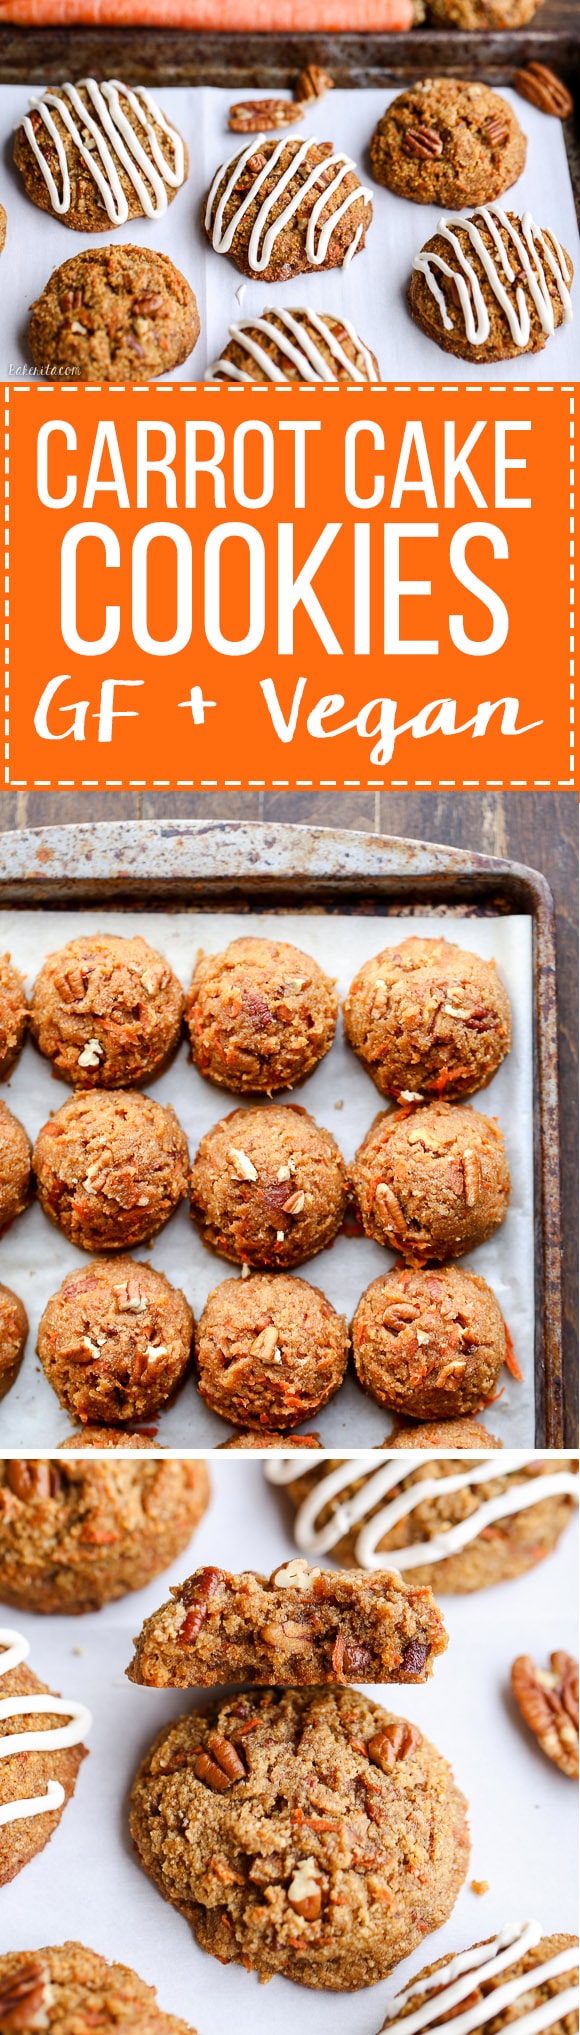 Carrot Cake Cookies with Cream Cheese Glaze (GF + Refined ...